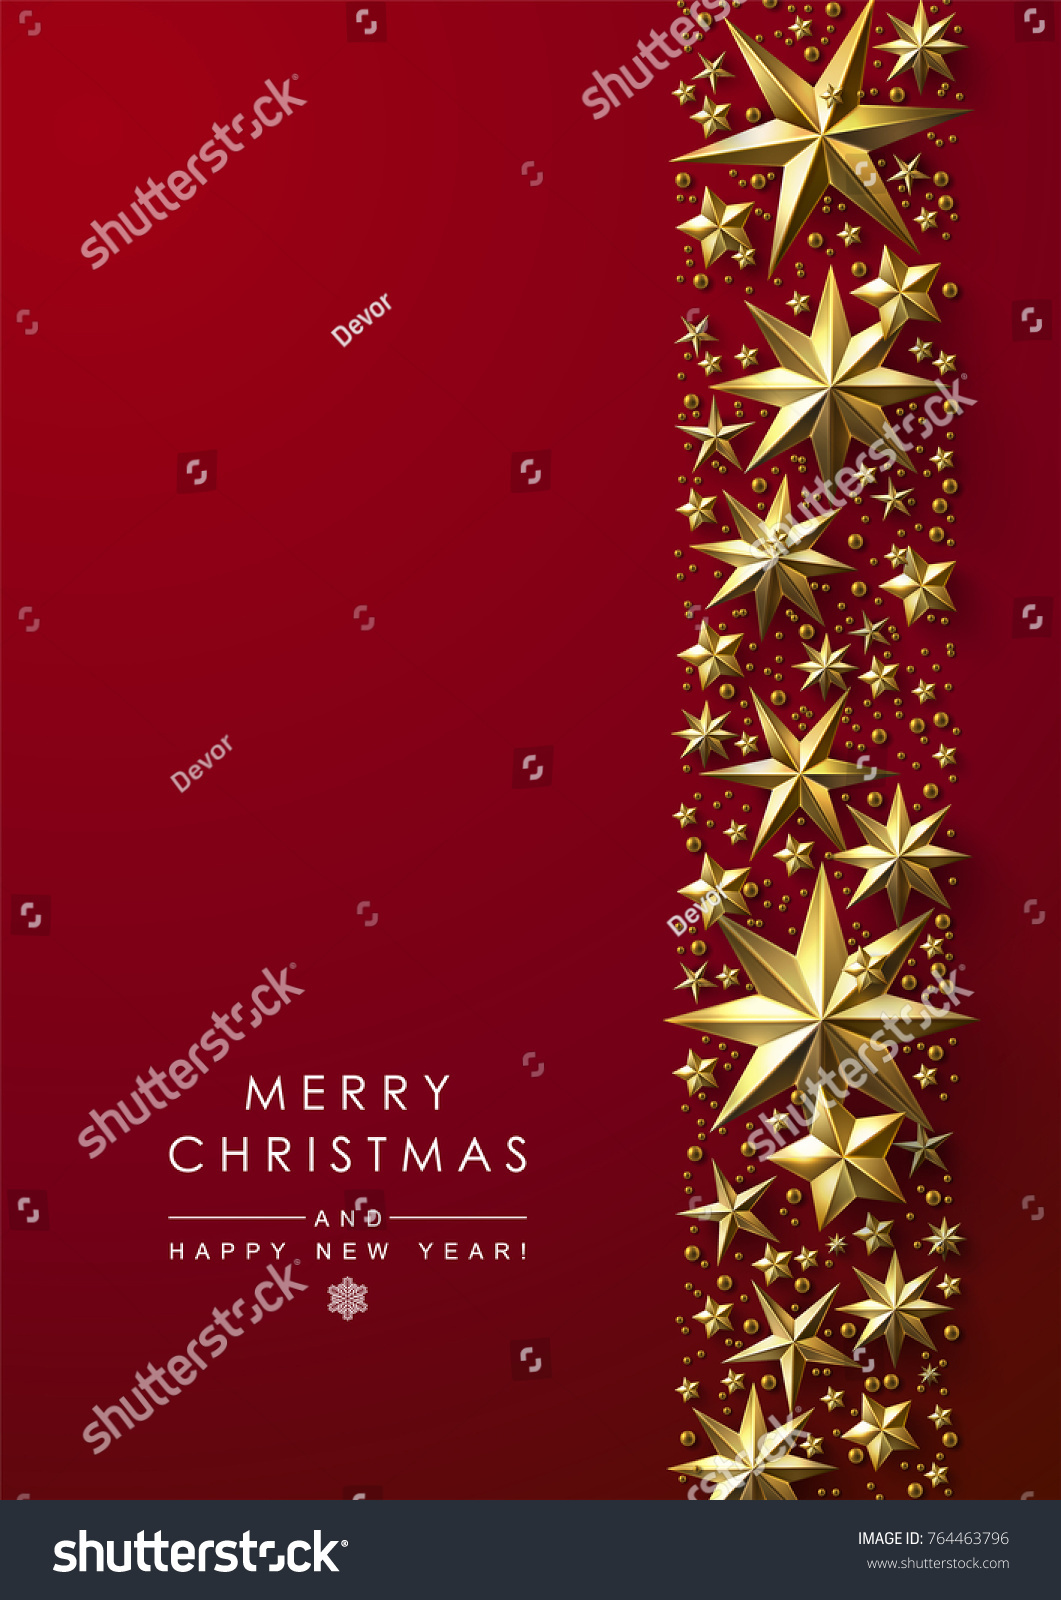 Christmas Background with Decorative Border made of Cutout Gold Foil Stars Chic Christmas Greeting Card